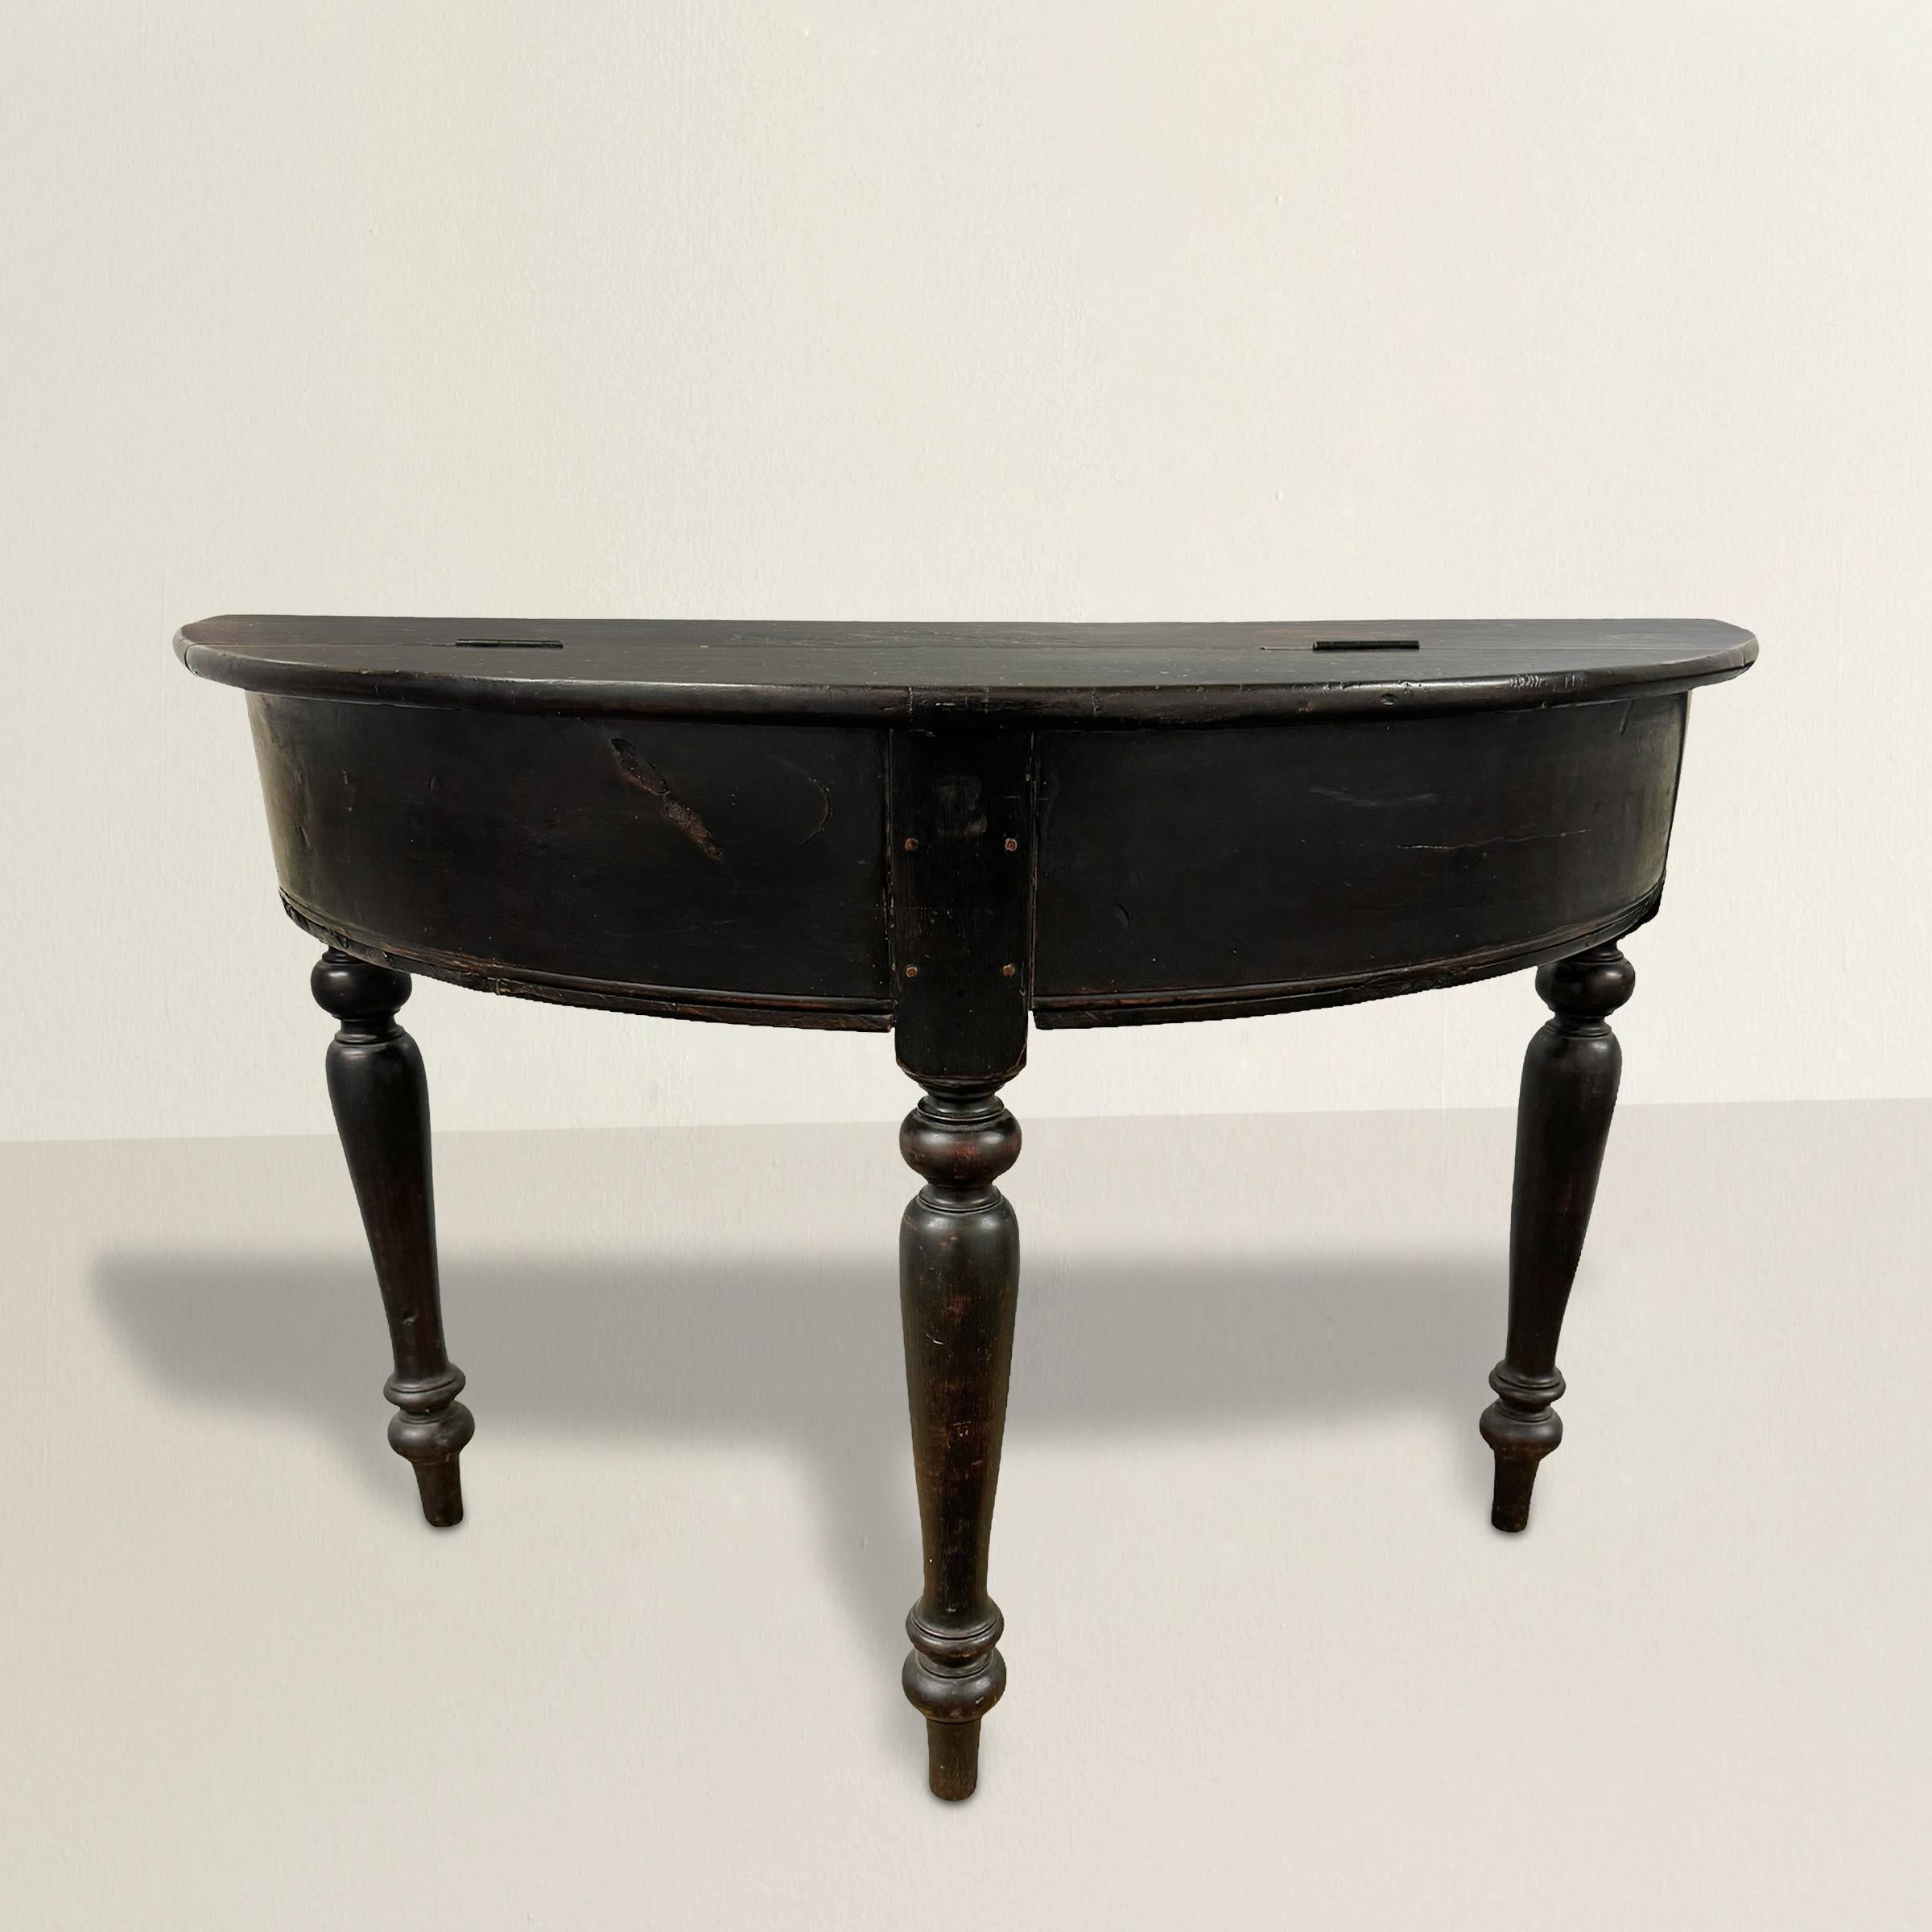 This 19th-century American demilune table is a charming blend of elegance and functionality. Its beautifully turned legs, ending with beaded feet, add a touch of sophistication to its simple yet chic design.

The table features a rather tall plain